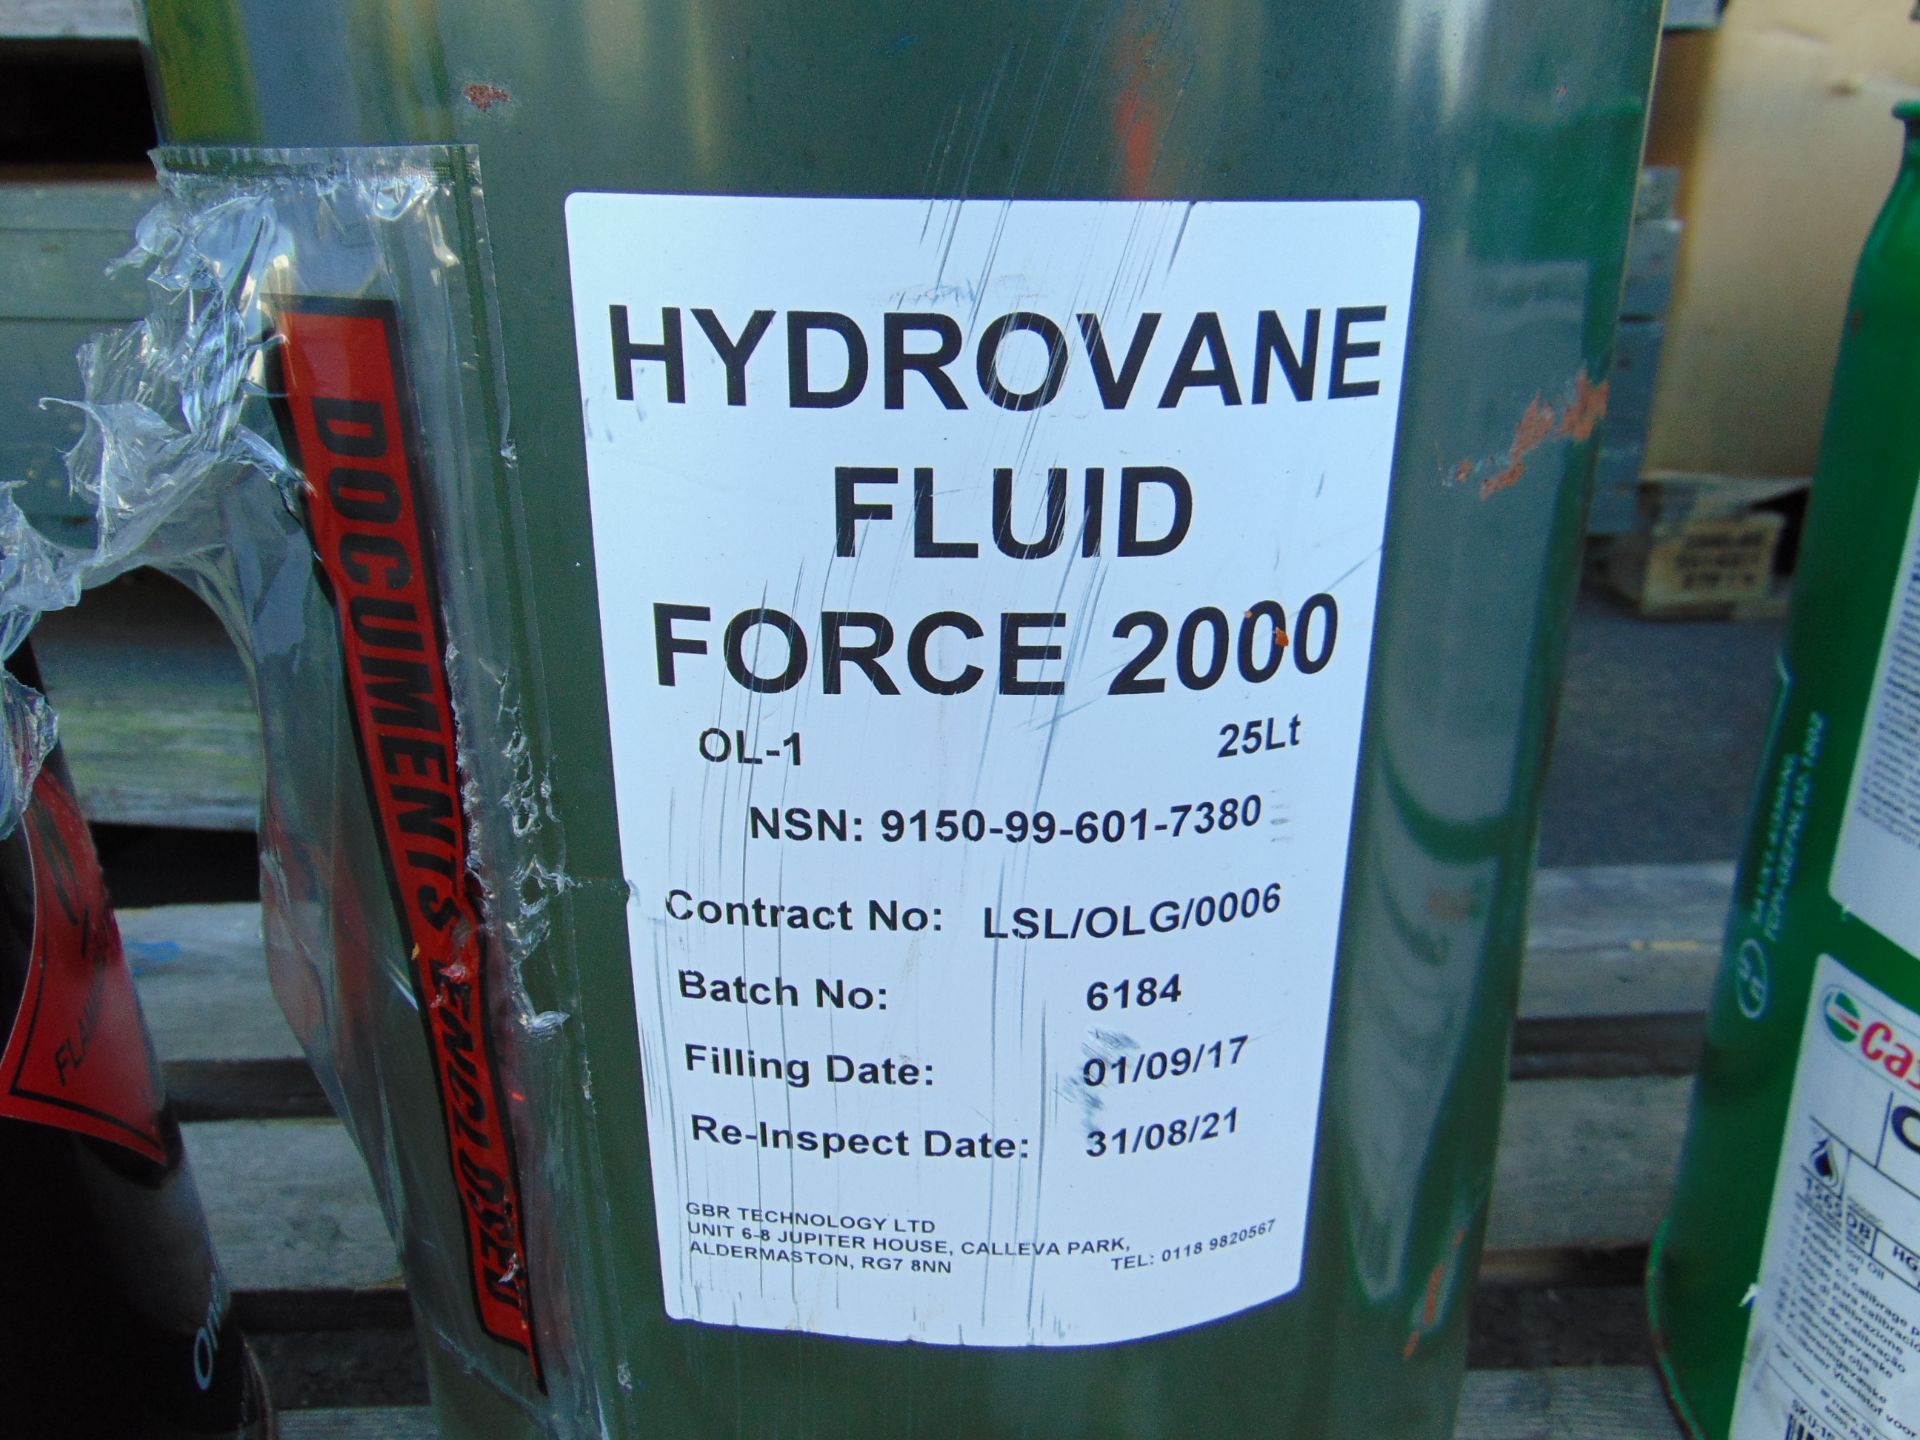 1x 25 litre Drum of Hydrovane Fluid Force 2000 - Image 2 of 2